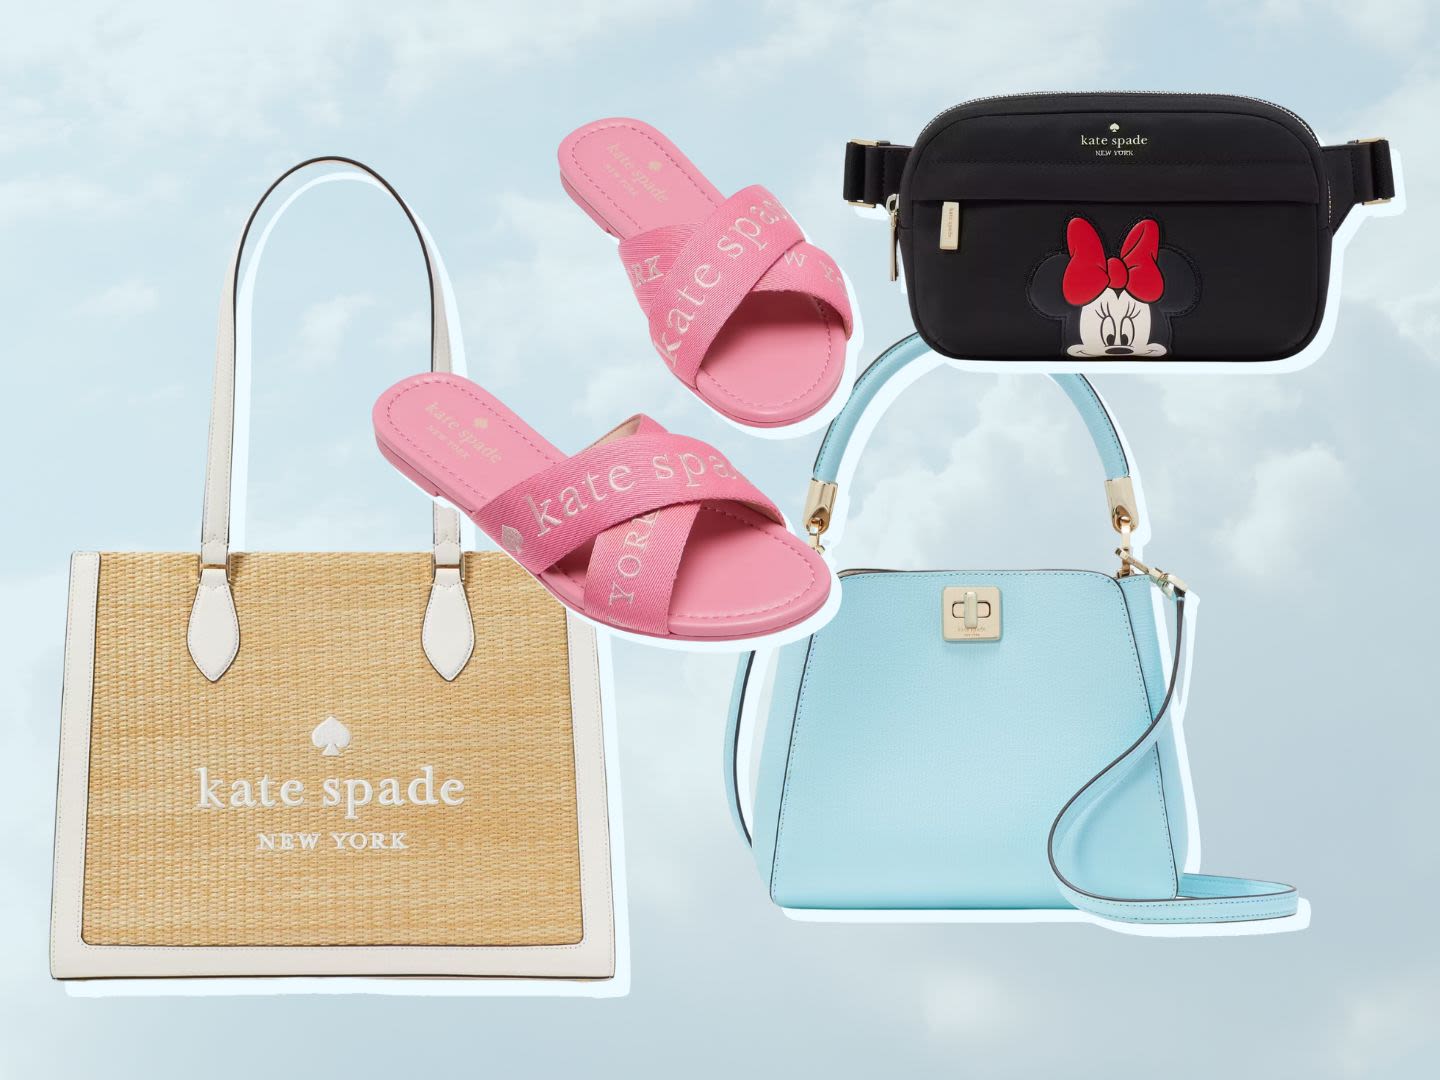 Kate Spade Outlet Has So Many Good Under-$100 Memorial Day Deals Including This Super Versatile $300 Bag for Just $59